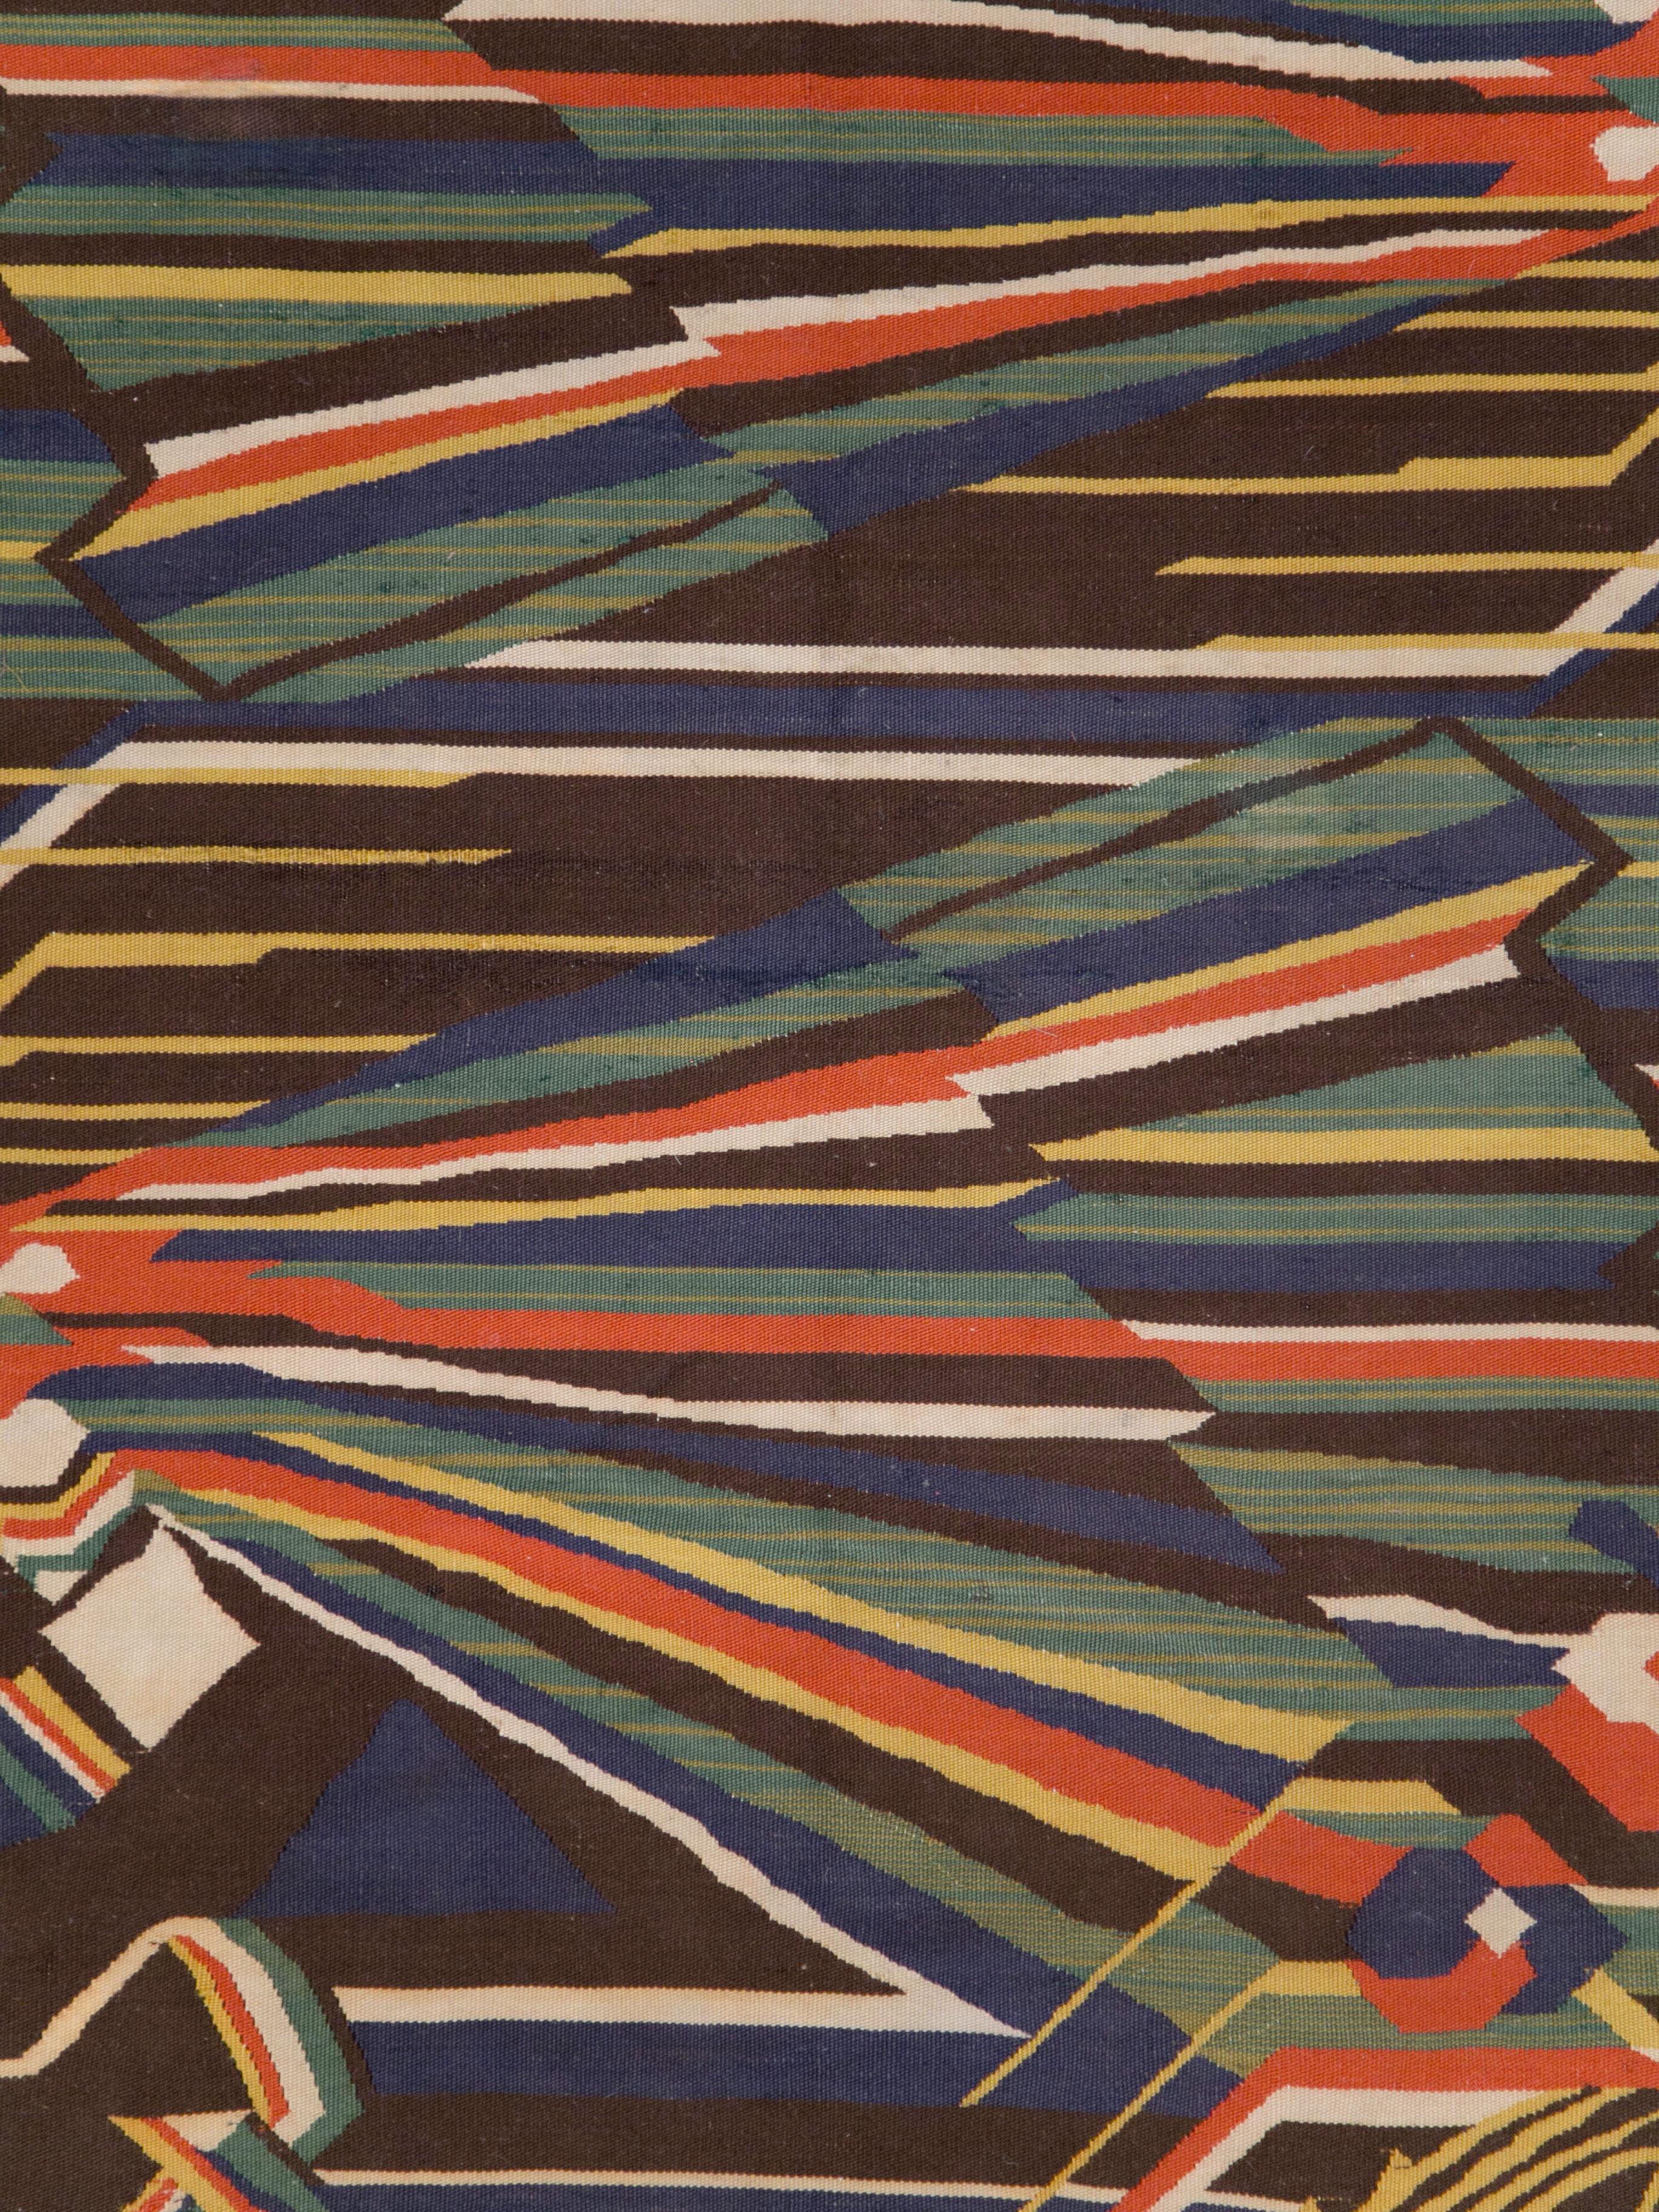 A vintage Romanian flat-weave rug, in the style of Scandinavian Modern, from the mid-20th century.